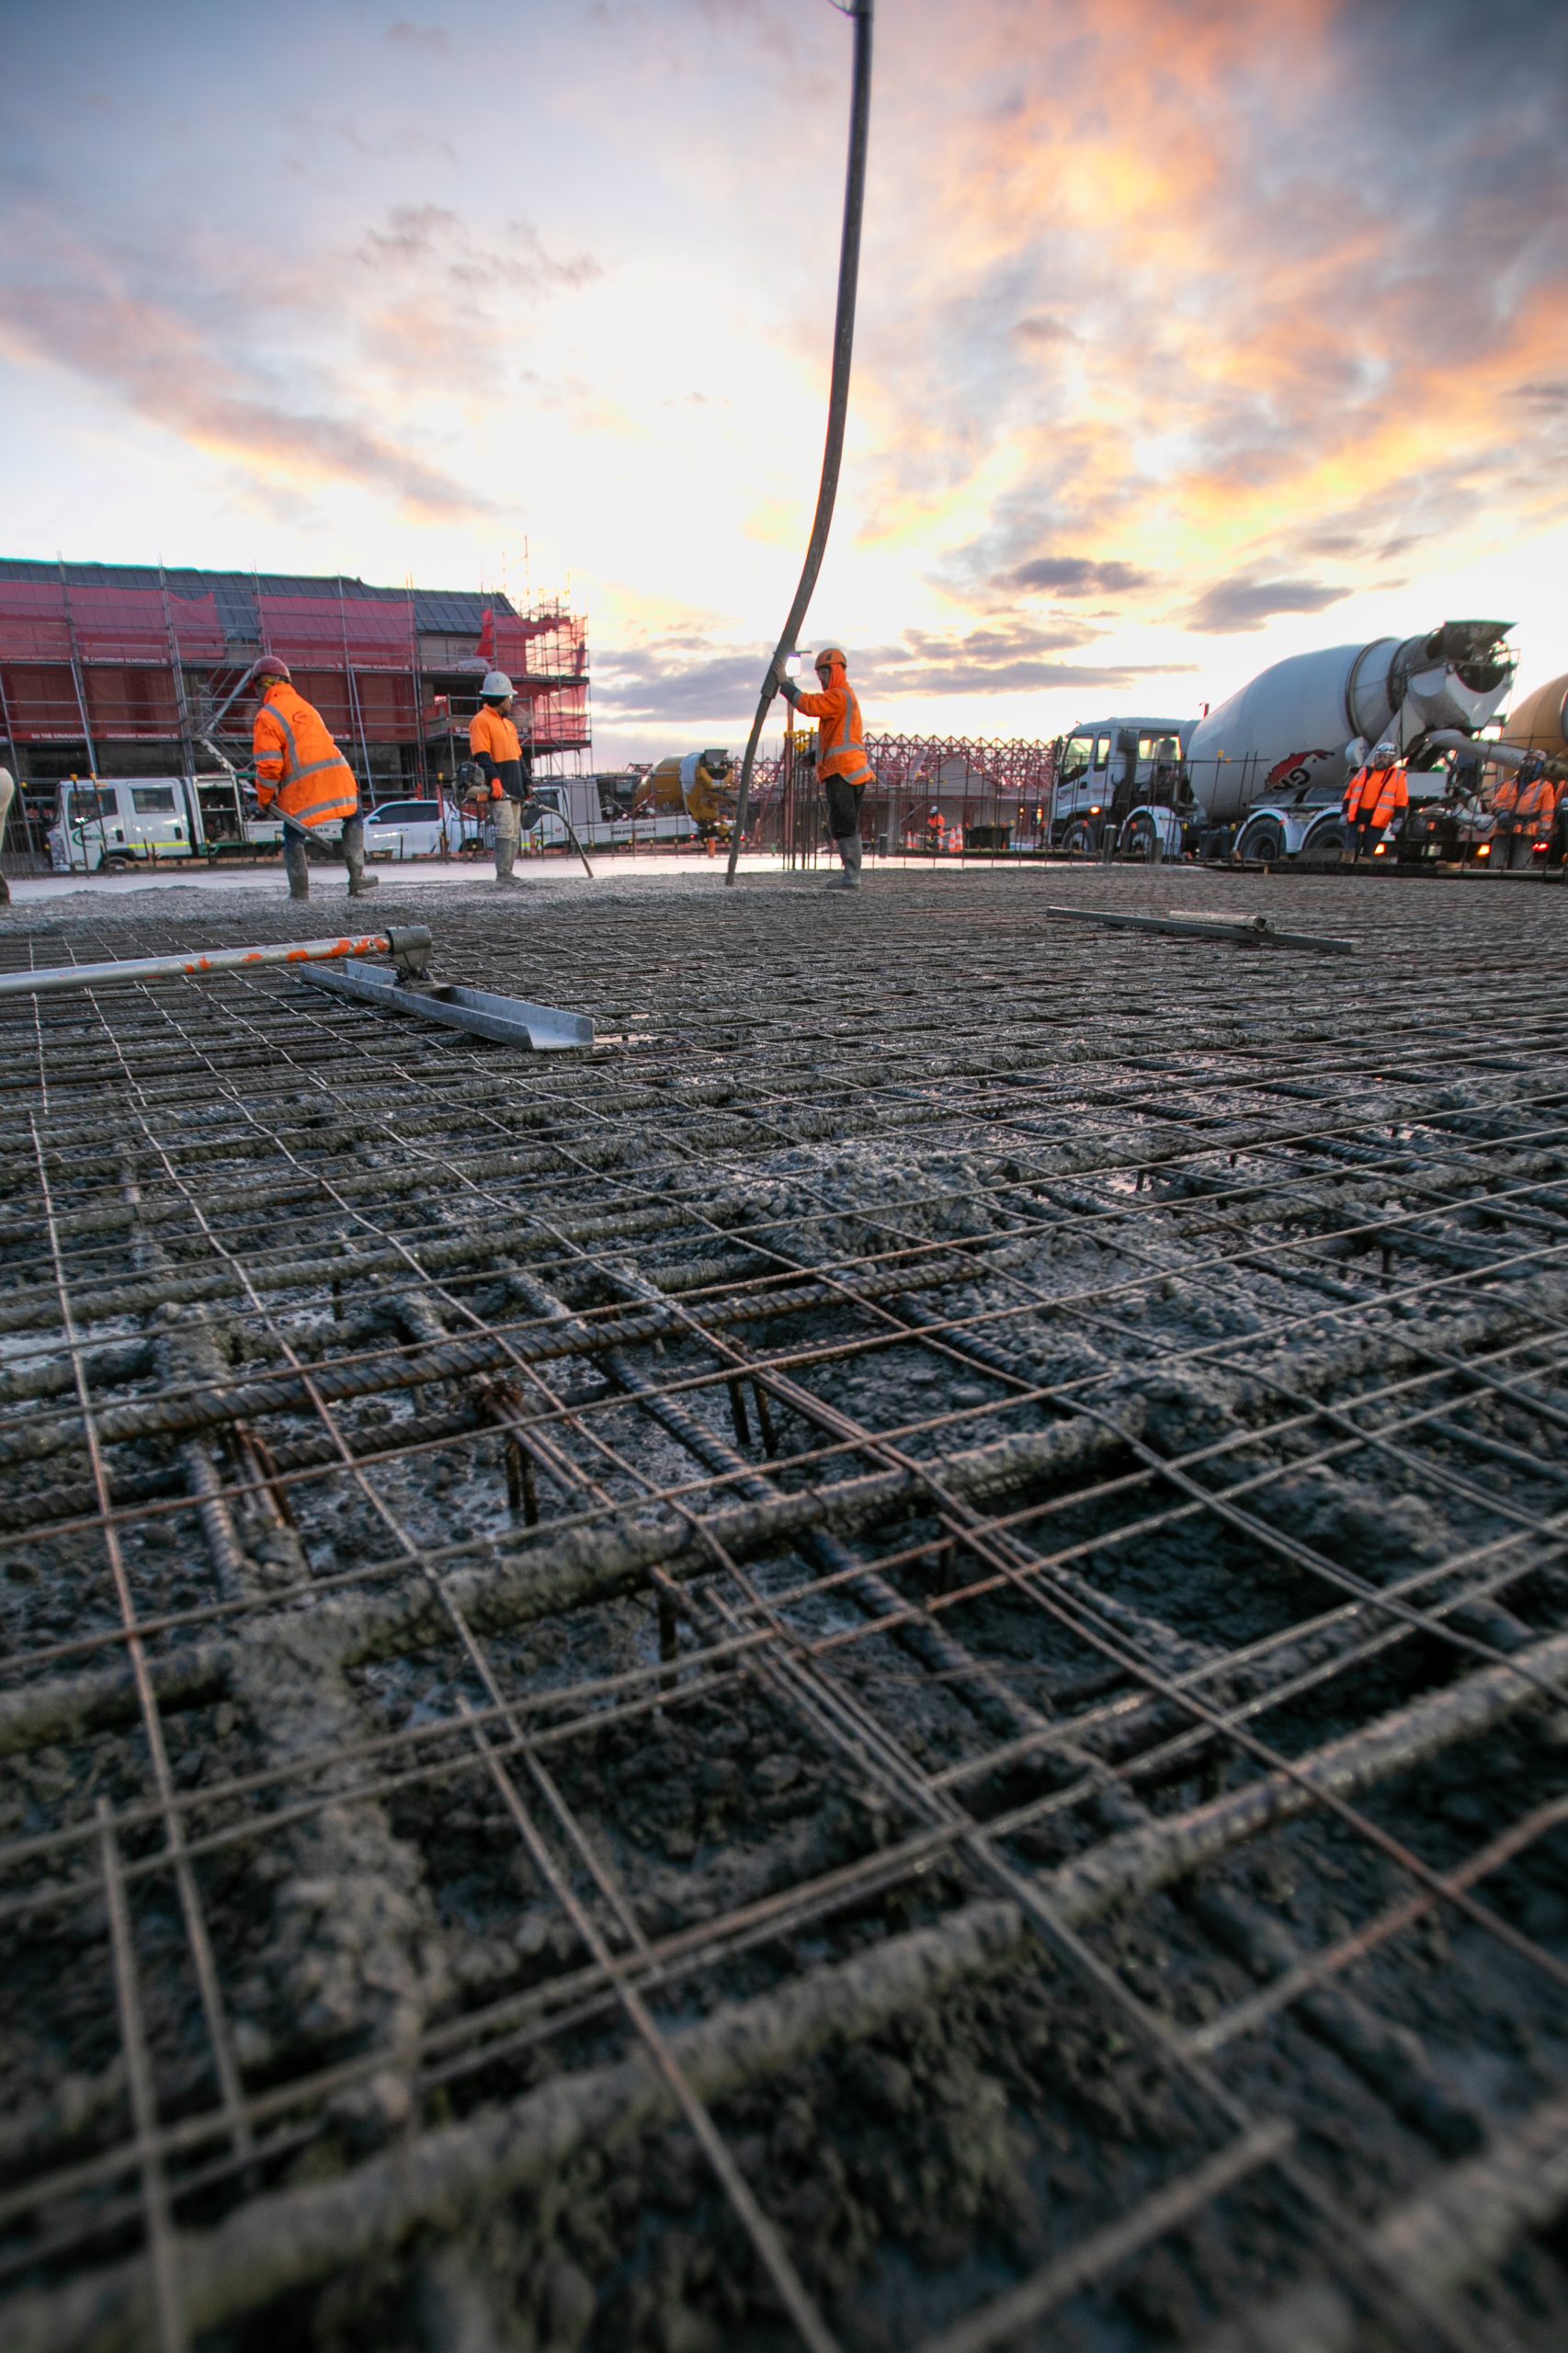 Construction site foundation with rebar steel and concrete at sunrise with colors and workers. Videography by Upsite